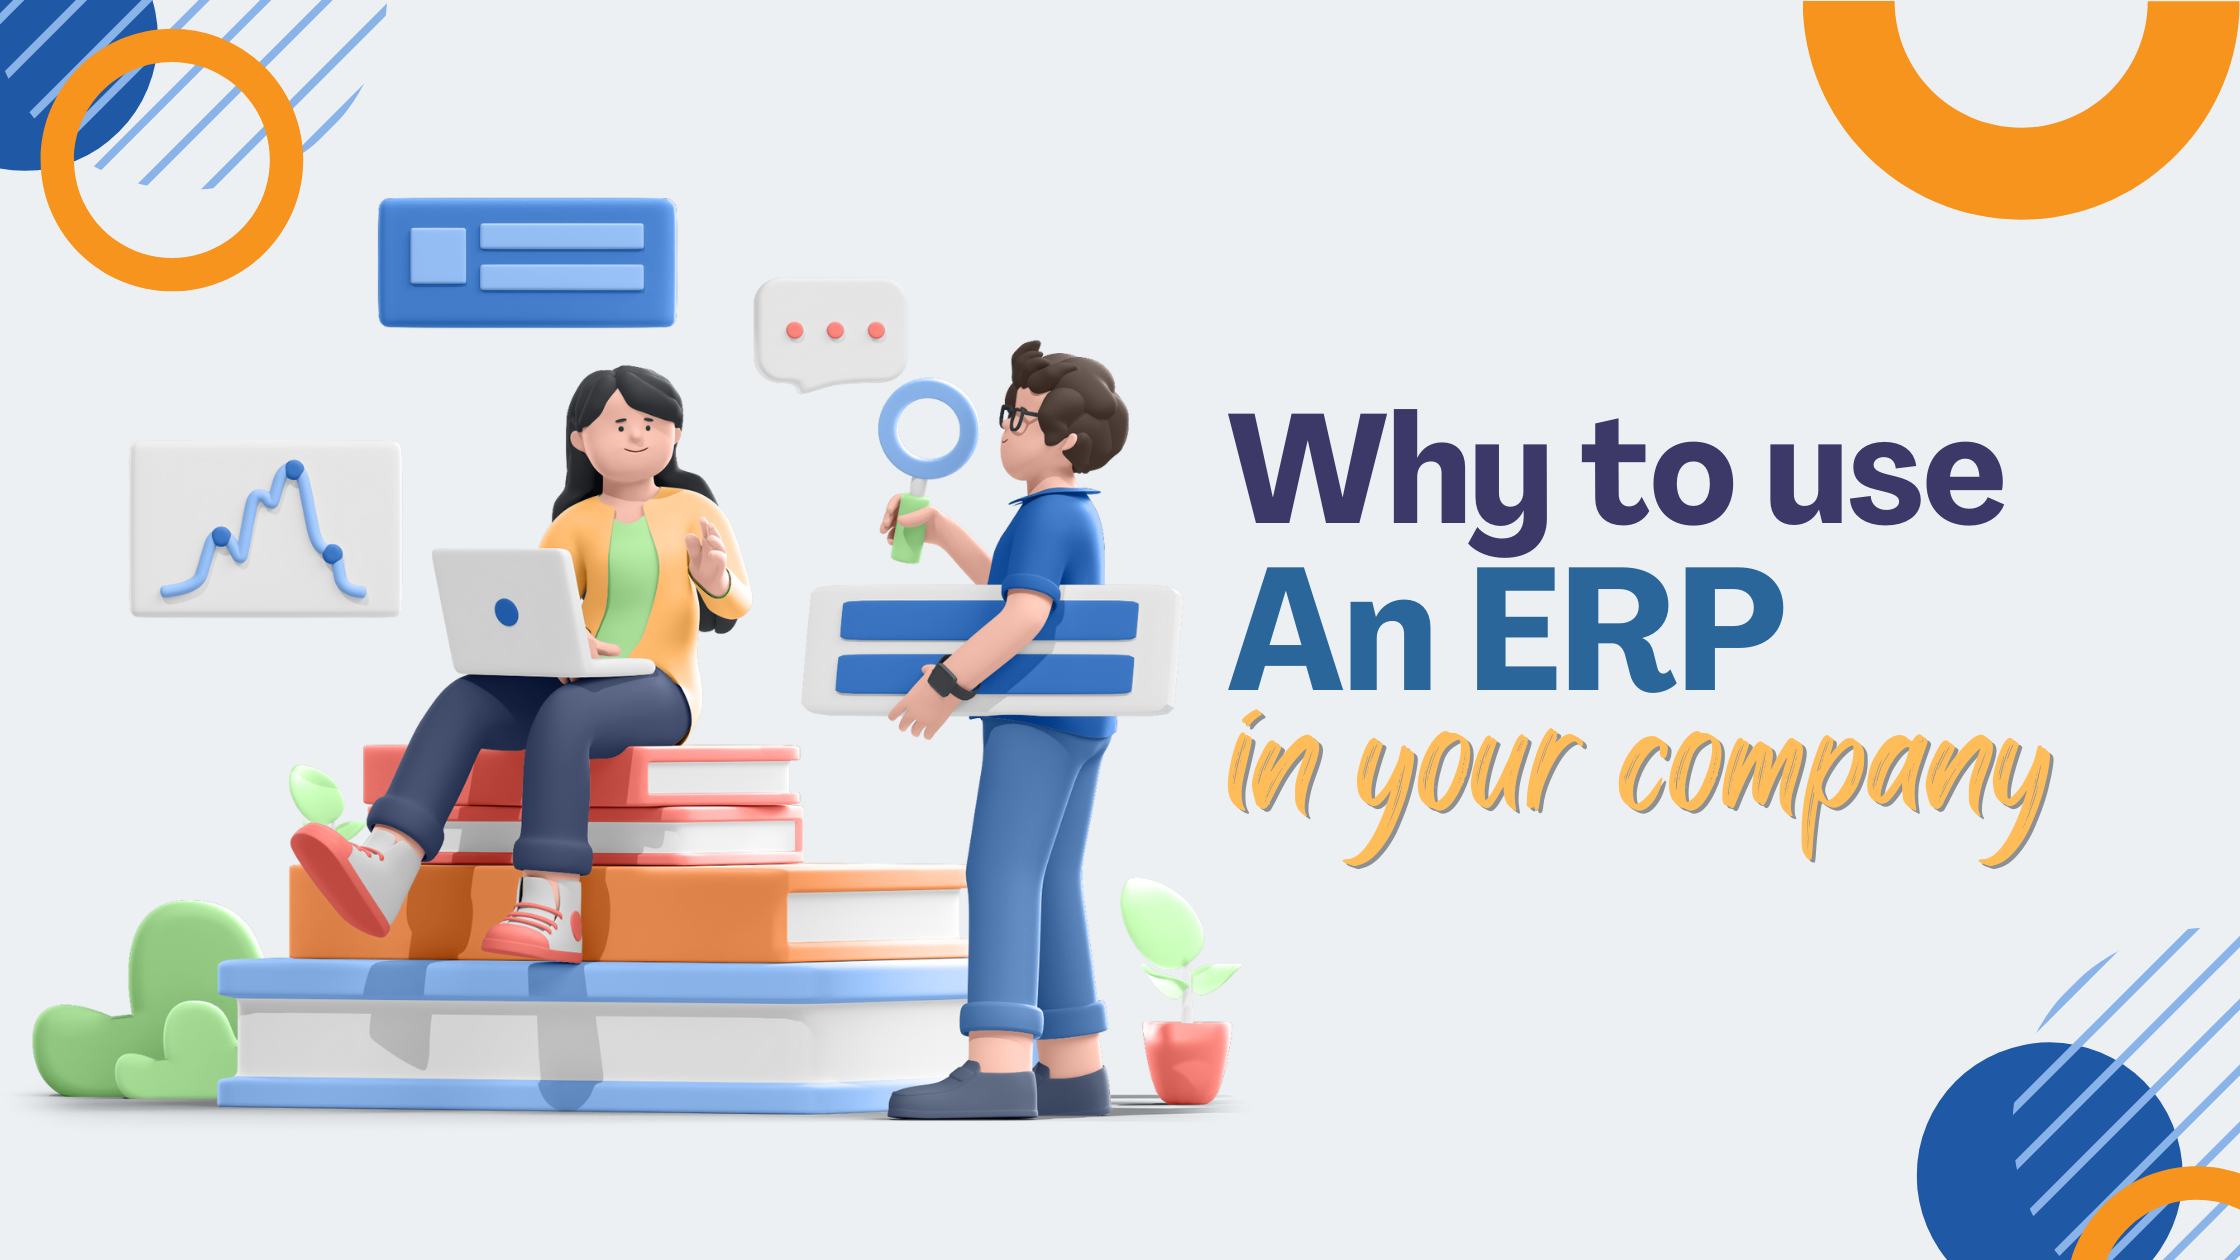 Benefits of using ERP in company